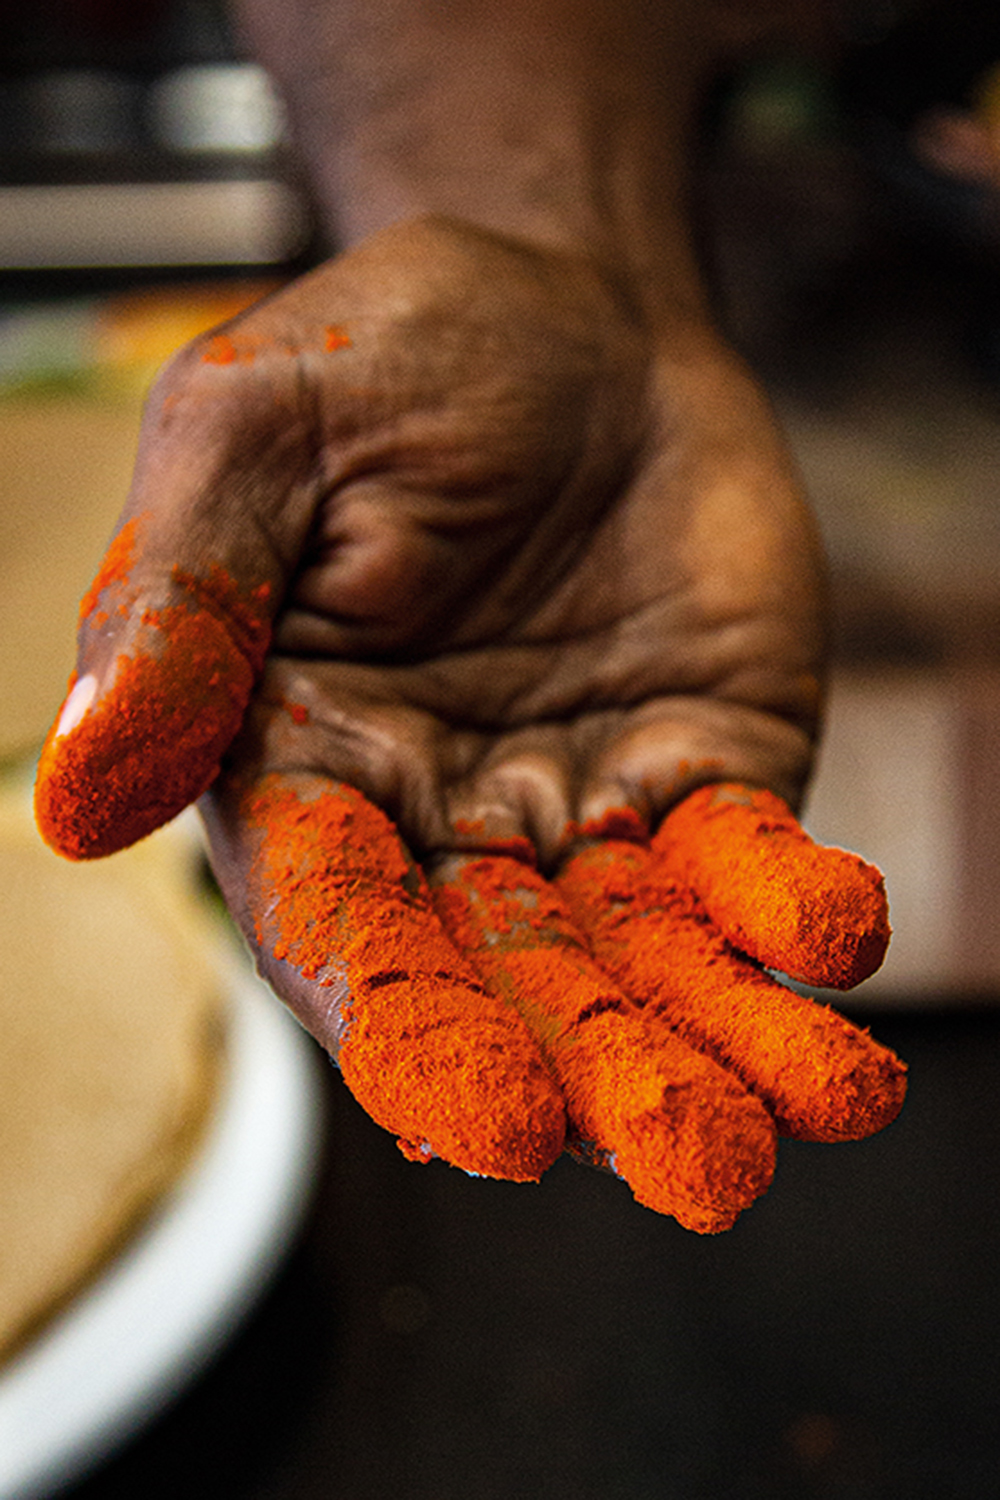 A hand covered in bright red powder.